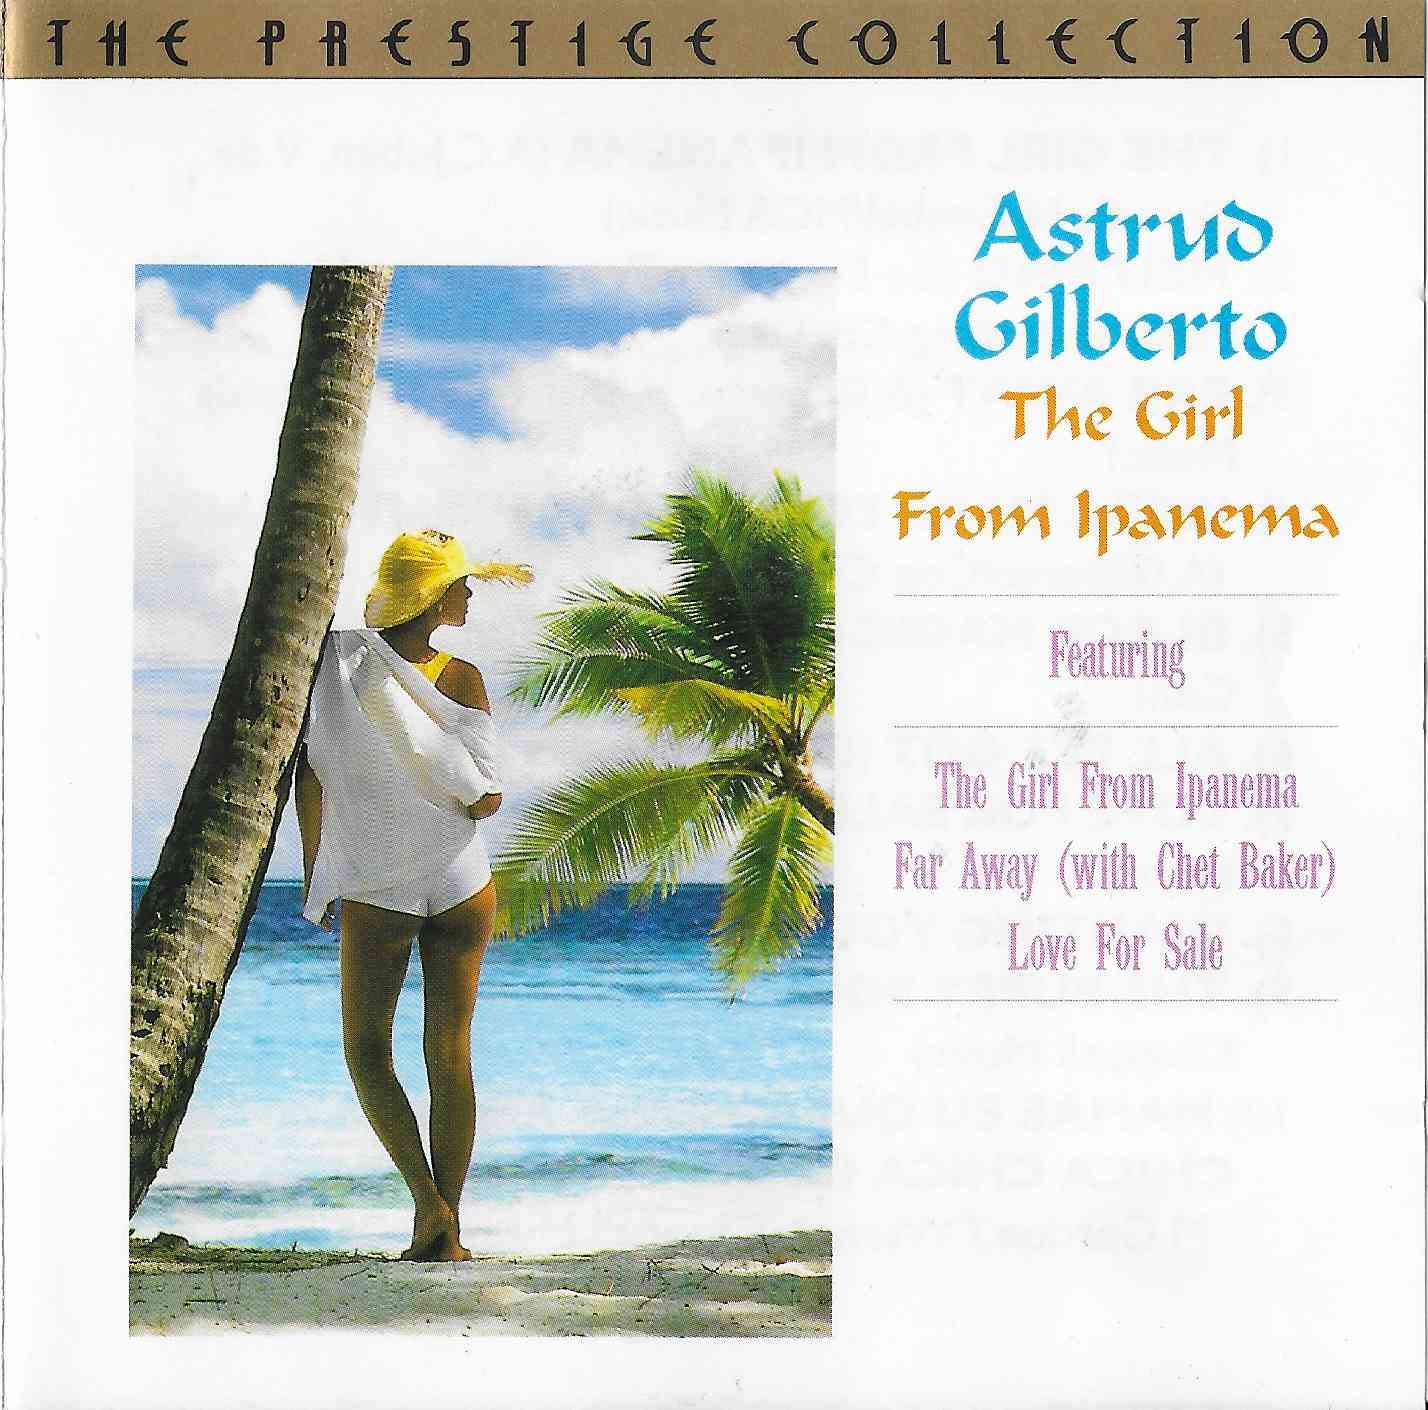 Picture of CDPC 5009 The girl from Ipanema - Astrud Gilberto by artist Astrud Gilberto from the BBC cds - Records and Tapes library